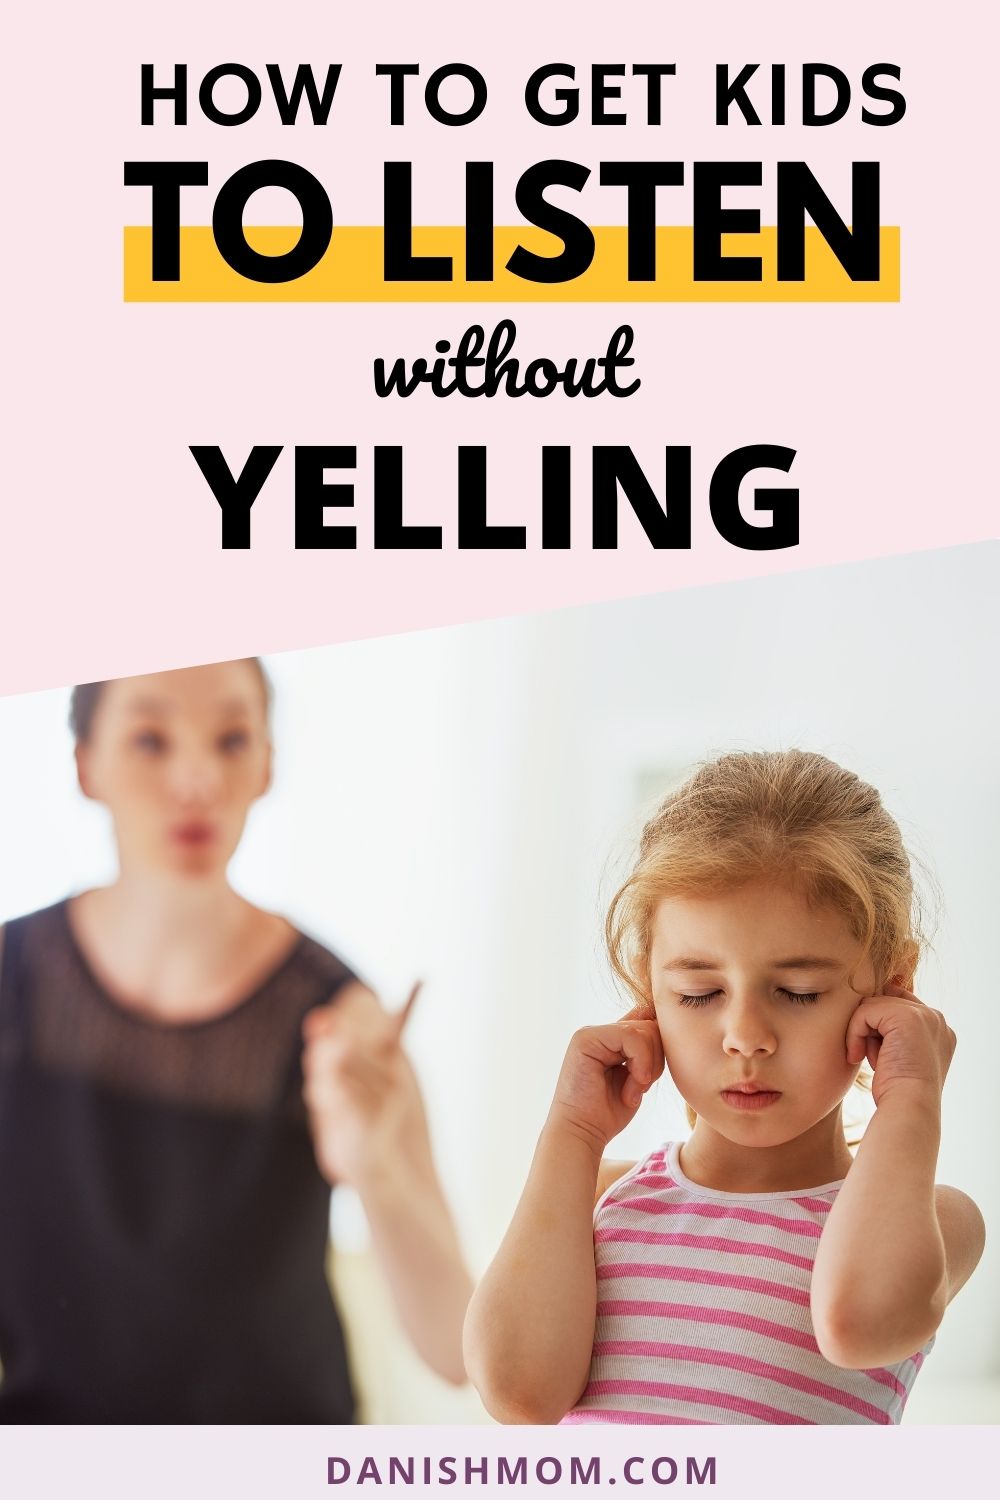 How to get kids to listen with tips from Nordic parenting. Get tips and toddler advice here.